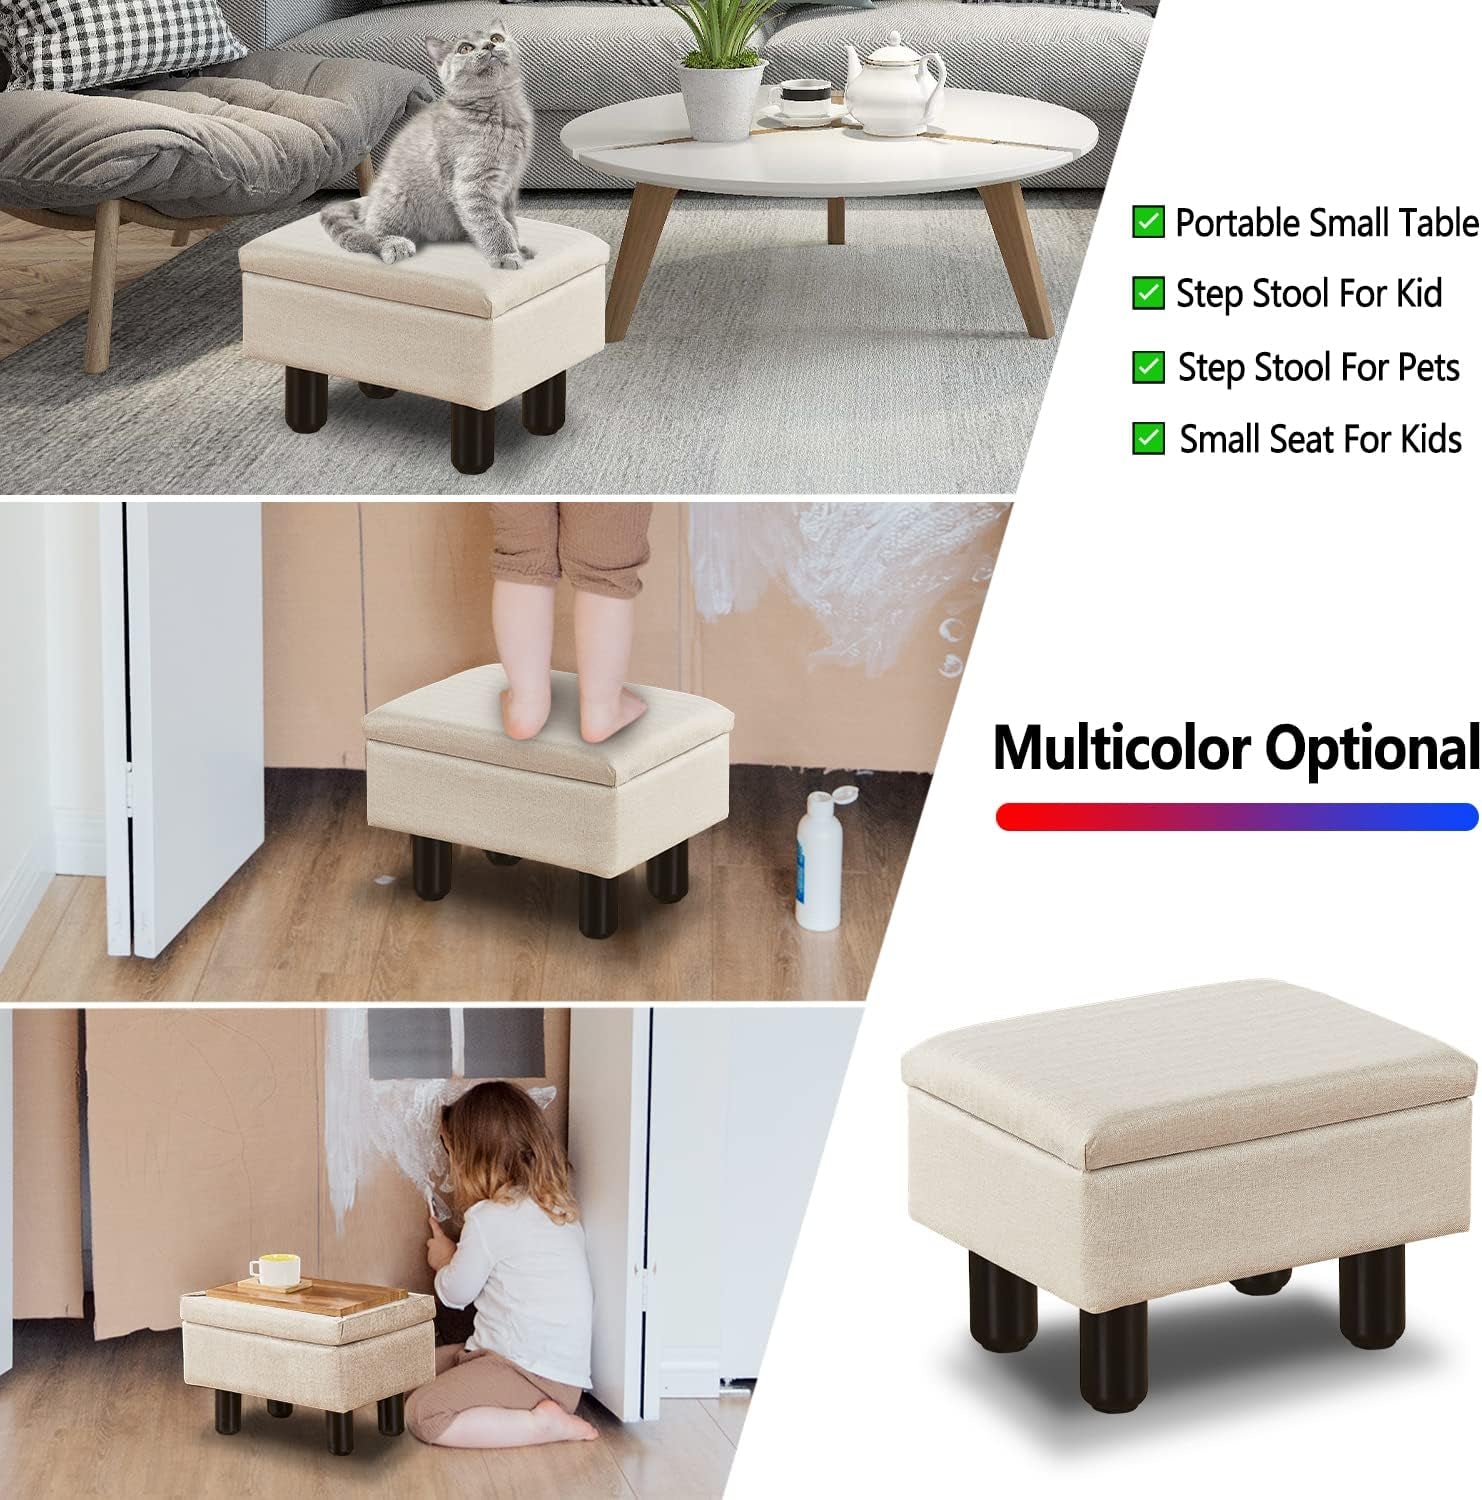 Linen Small Foot Stool Ottomans Multifunctional Footrest Storage Ottoman Upholstered Step Stool Seat with Solid Wood Legs Modern Accent Stools Suitable for Couch Living Room Bedroom Beige